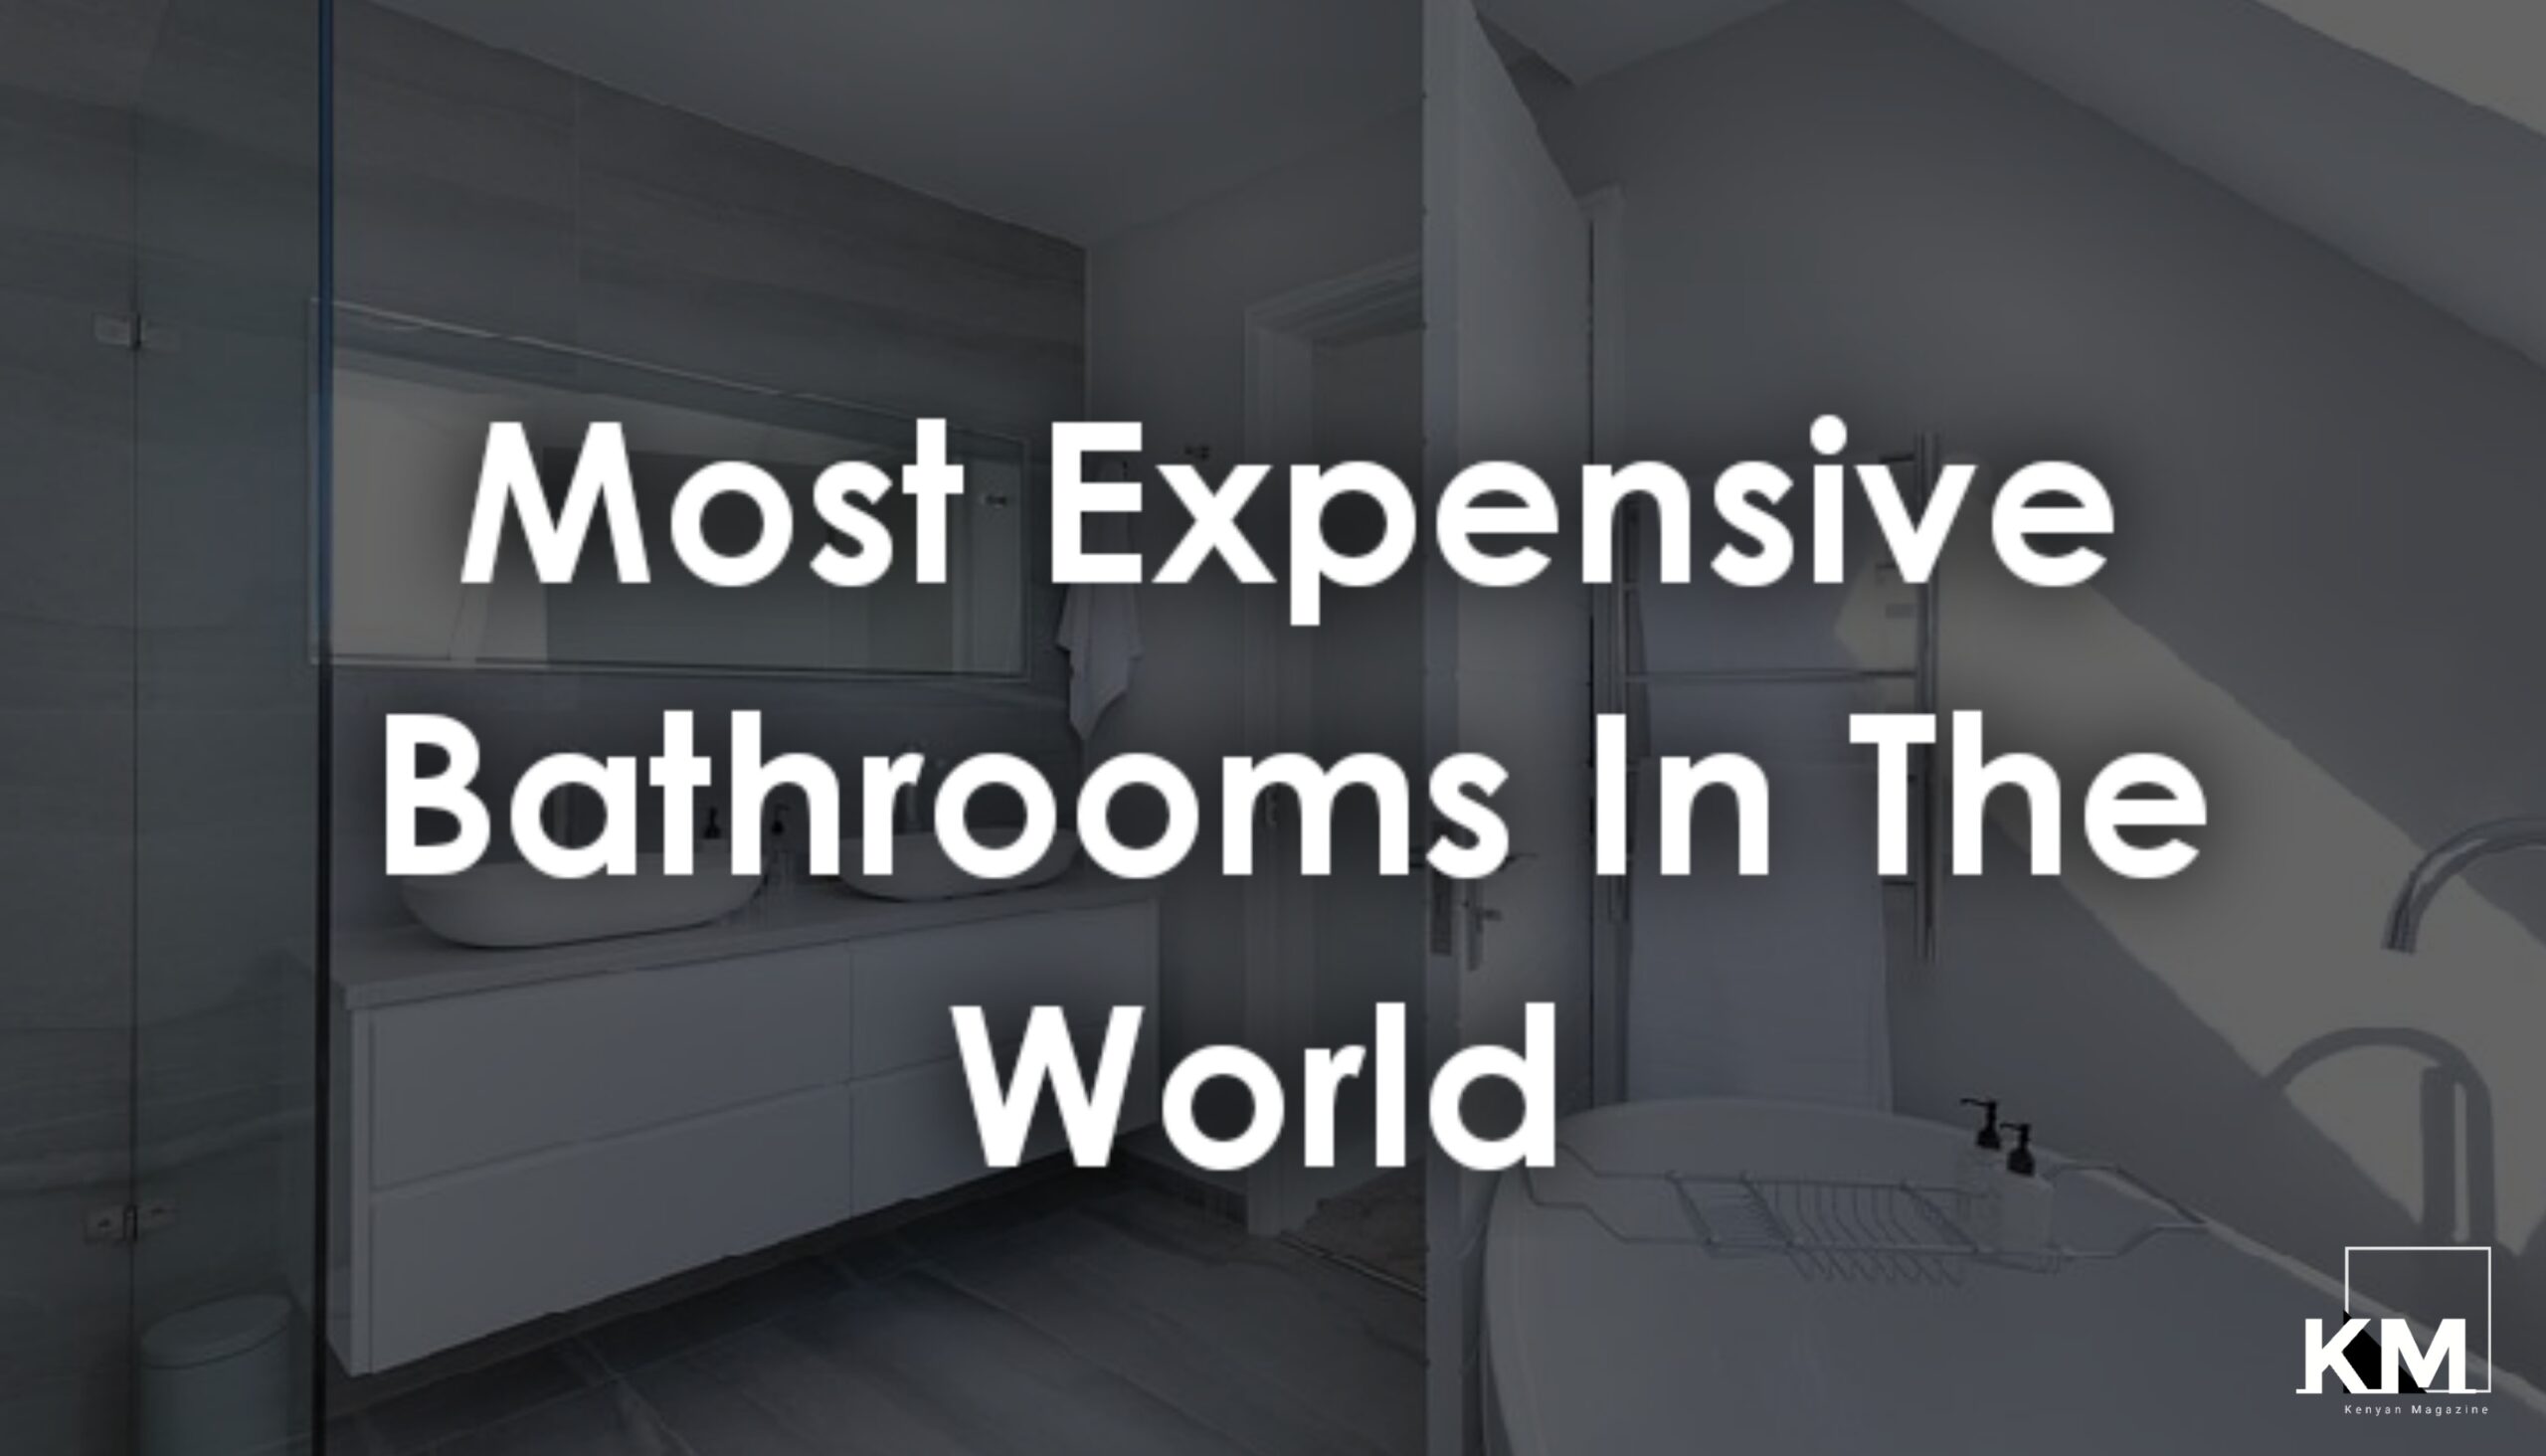 Most expensive bathrooms in the world